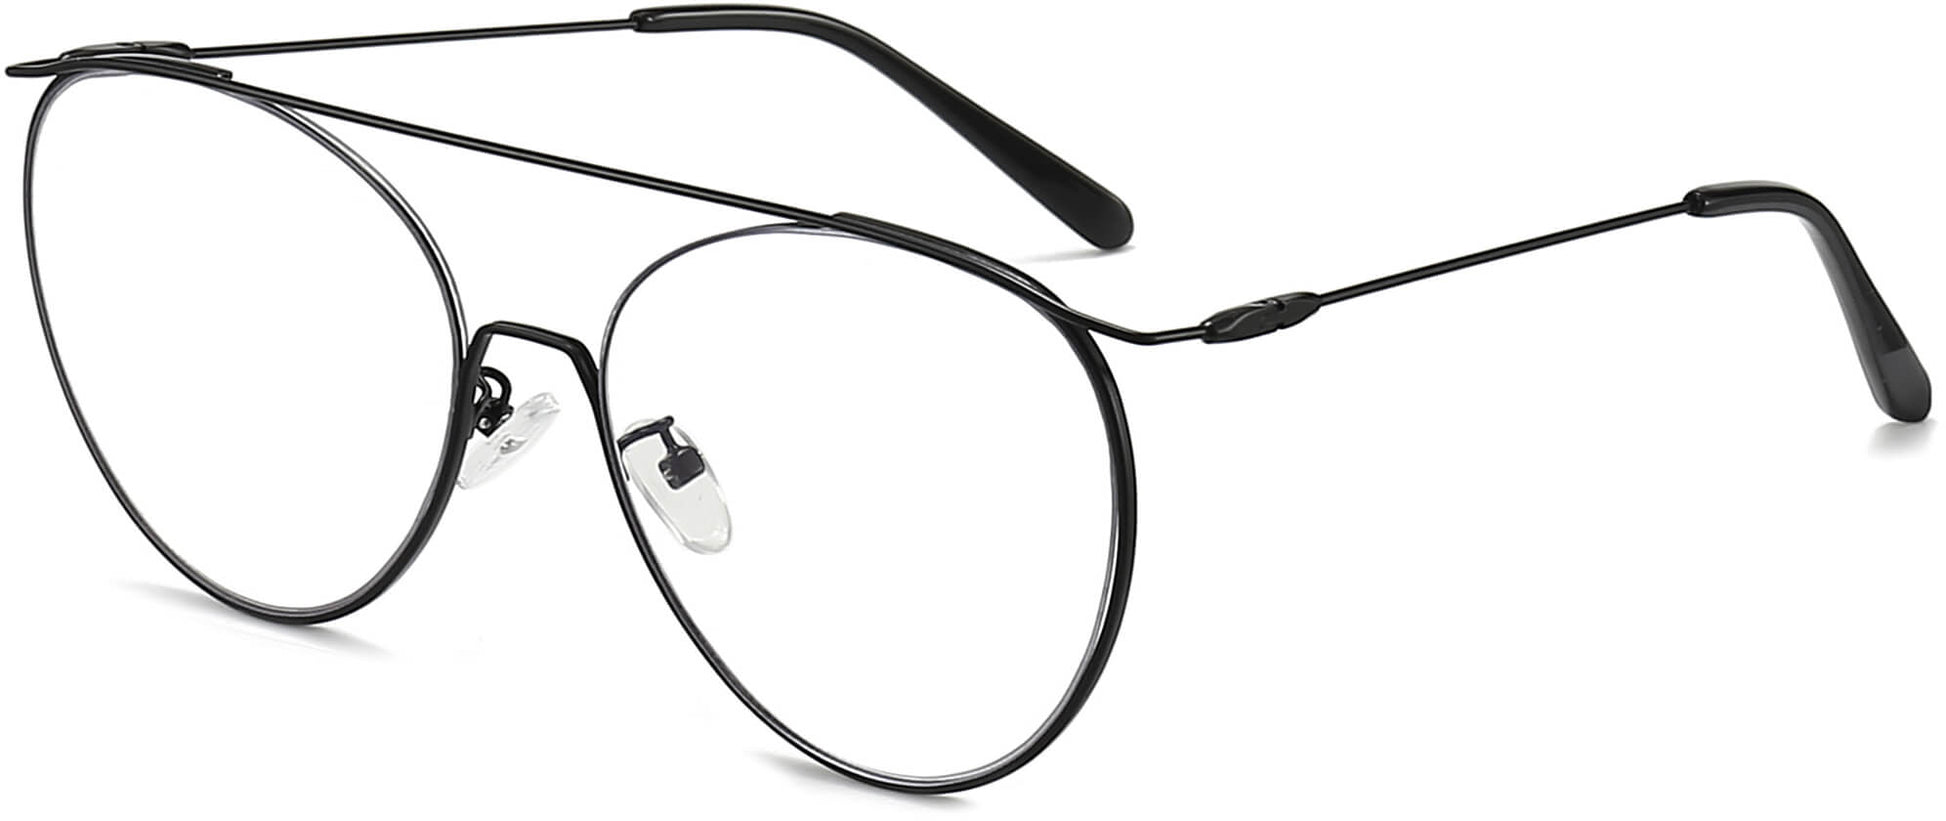 Zaire Round Black Eyeglasses from ANRRI, angle view